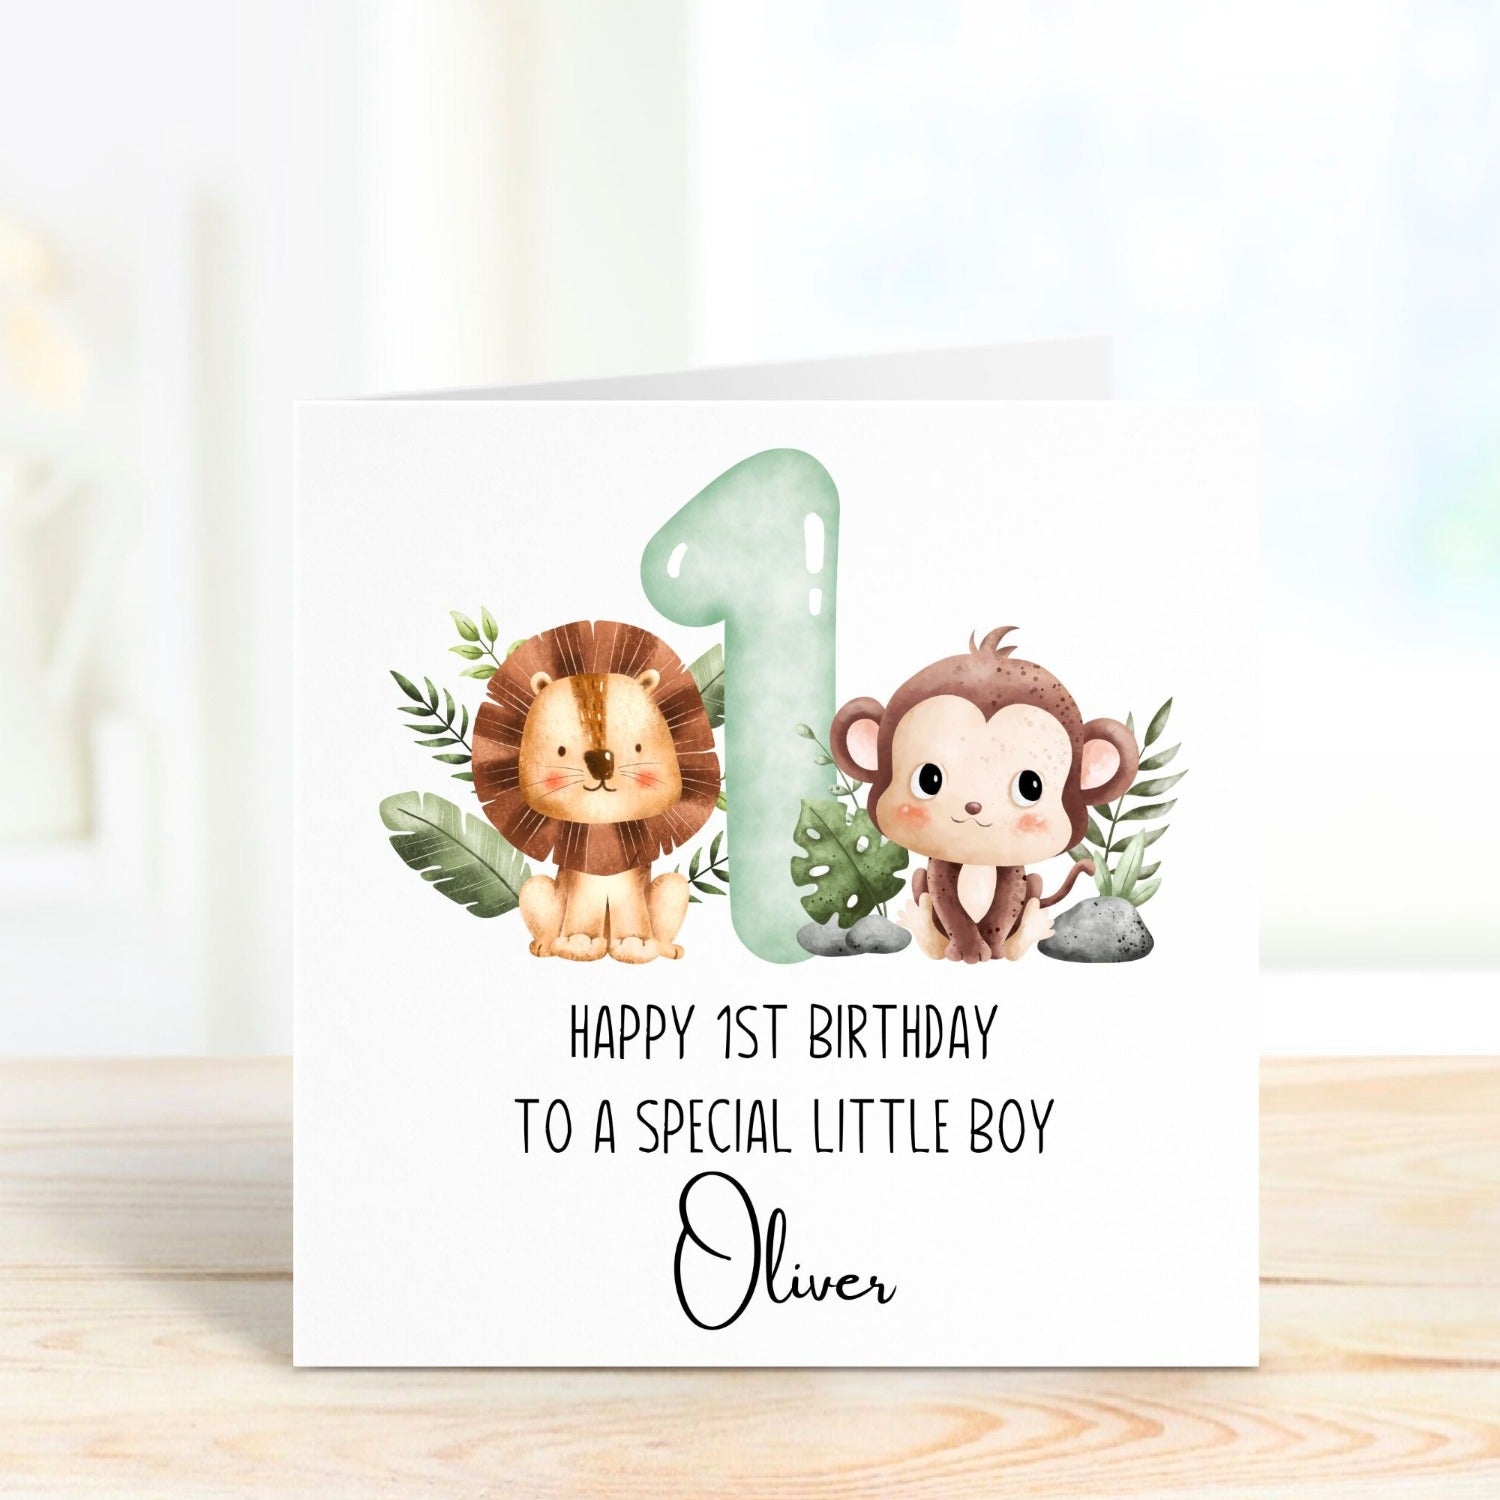 1st birthday personalised card with lion and monkey animals